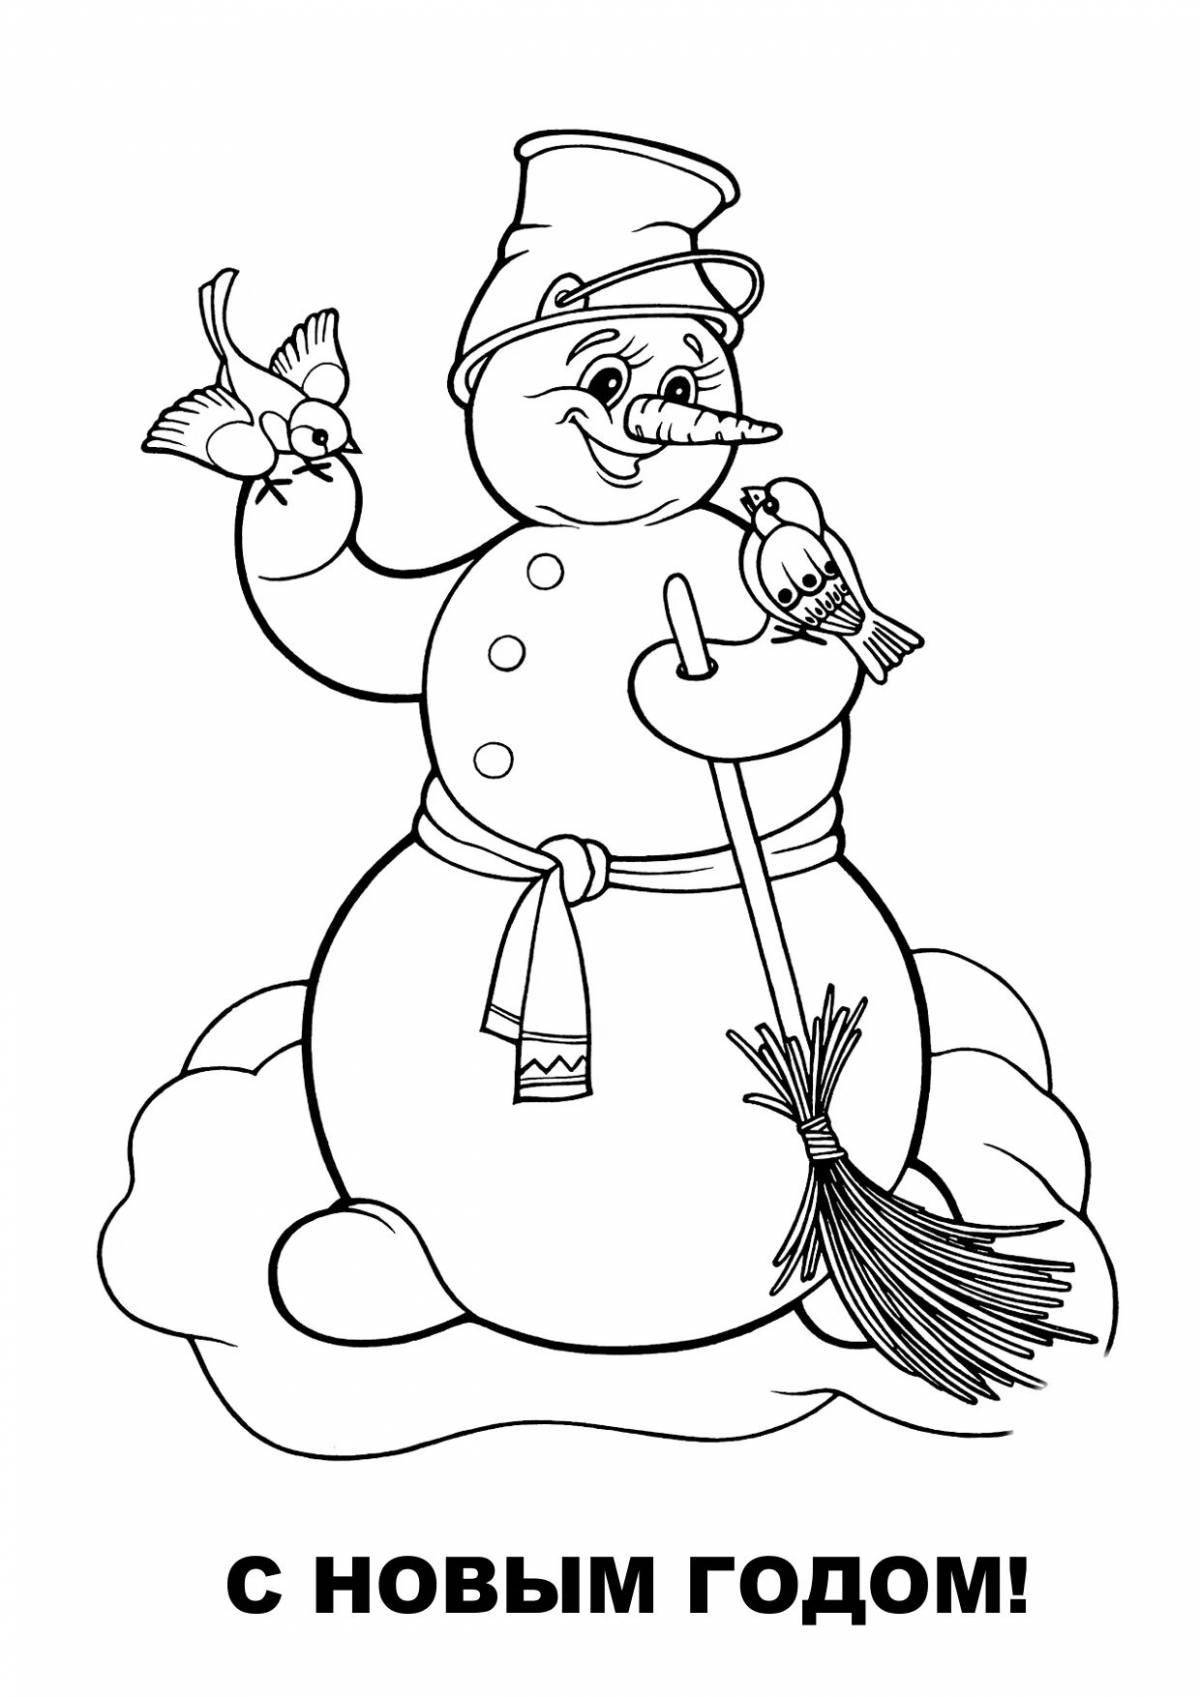 Delightful coloring book snowman with a broom